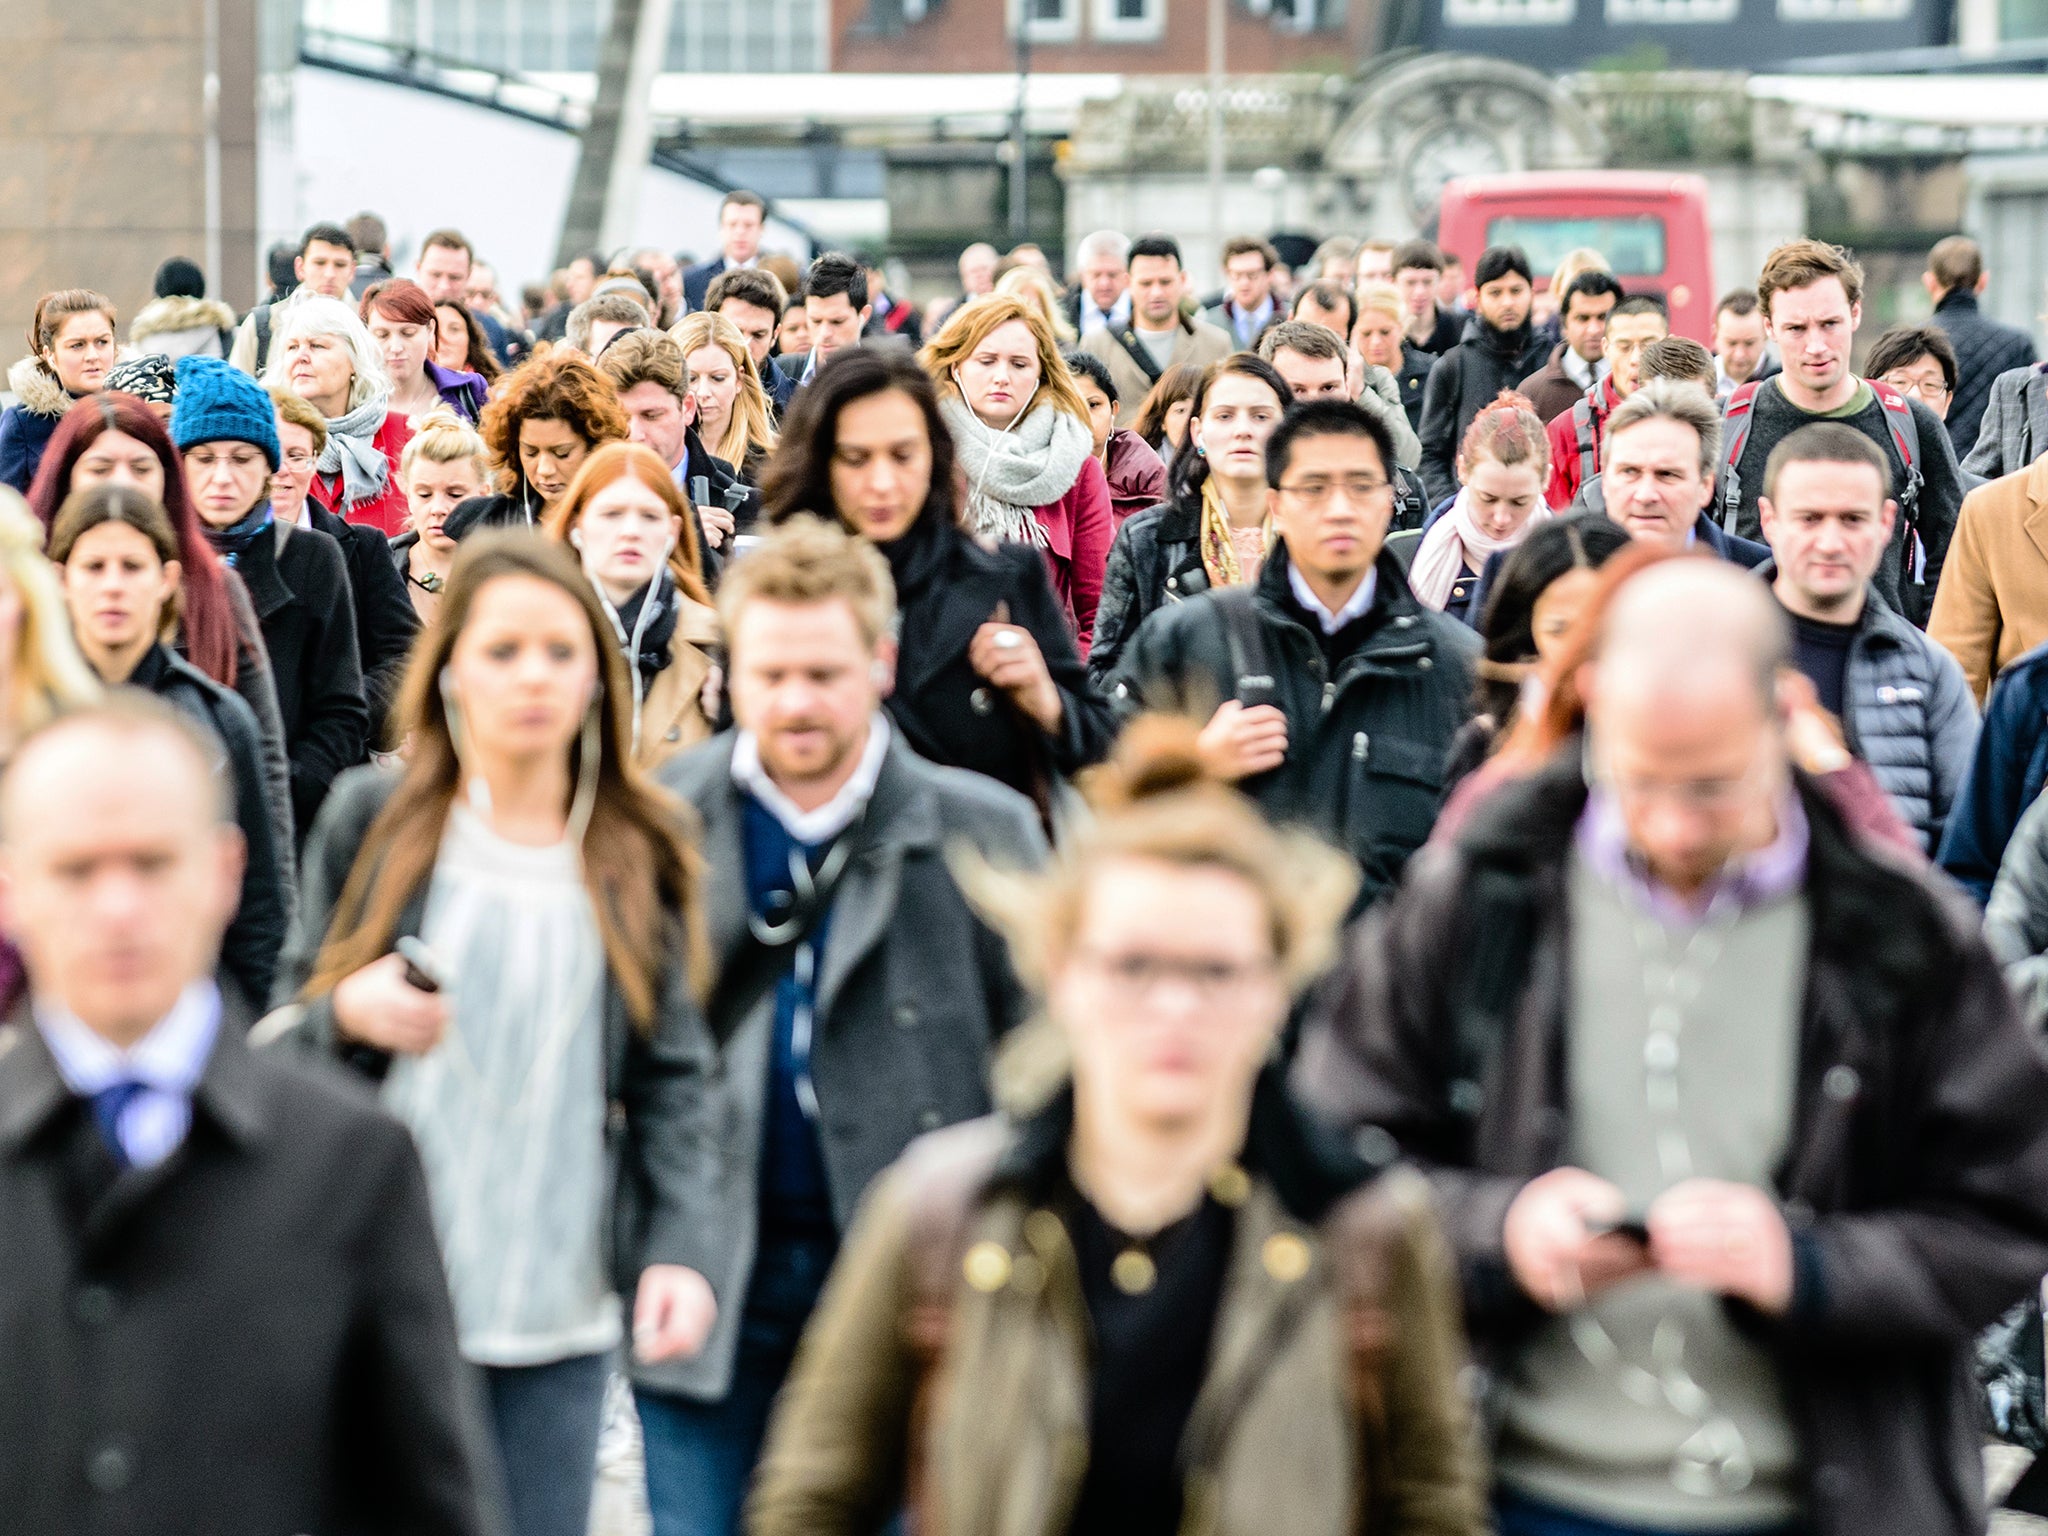 London population predicted to near 10 million within a decade as